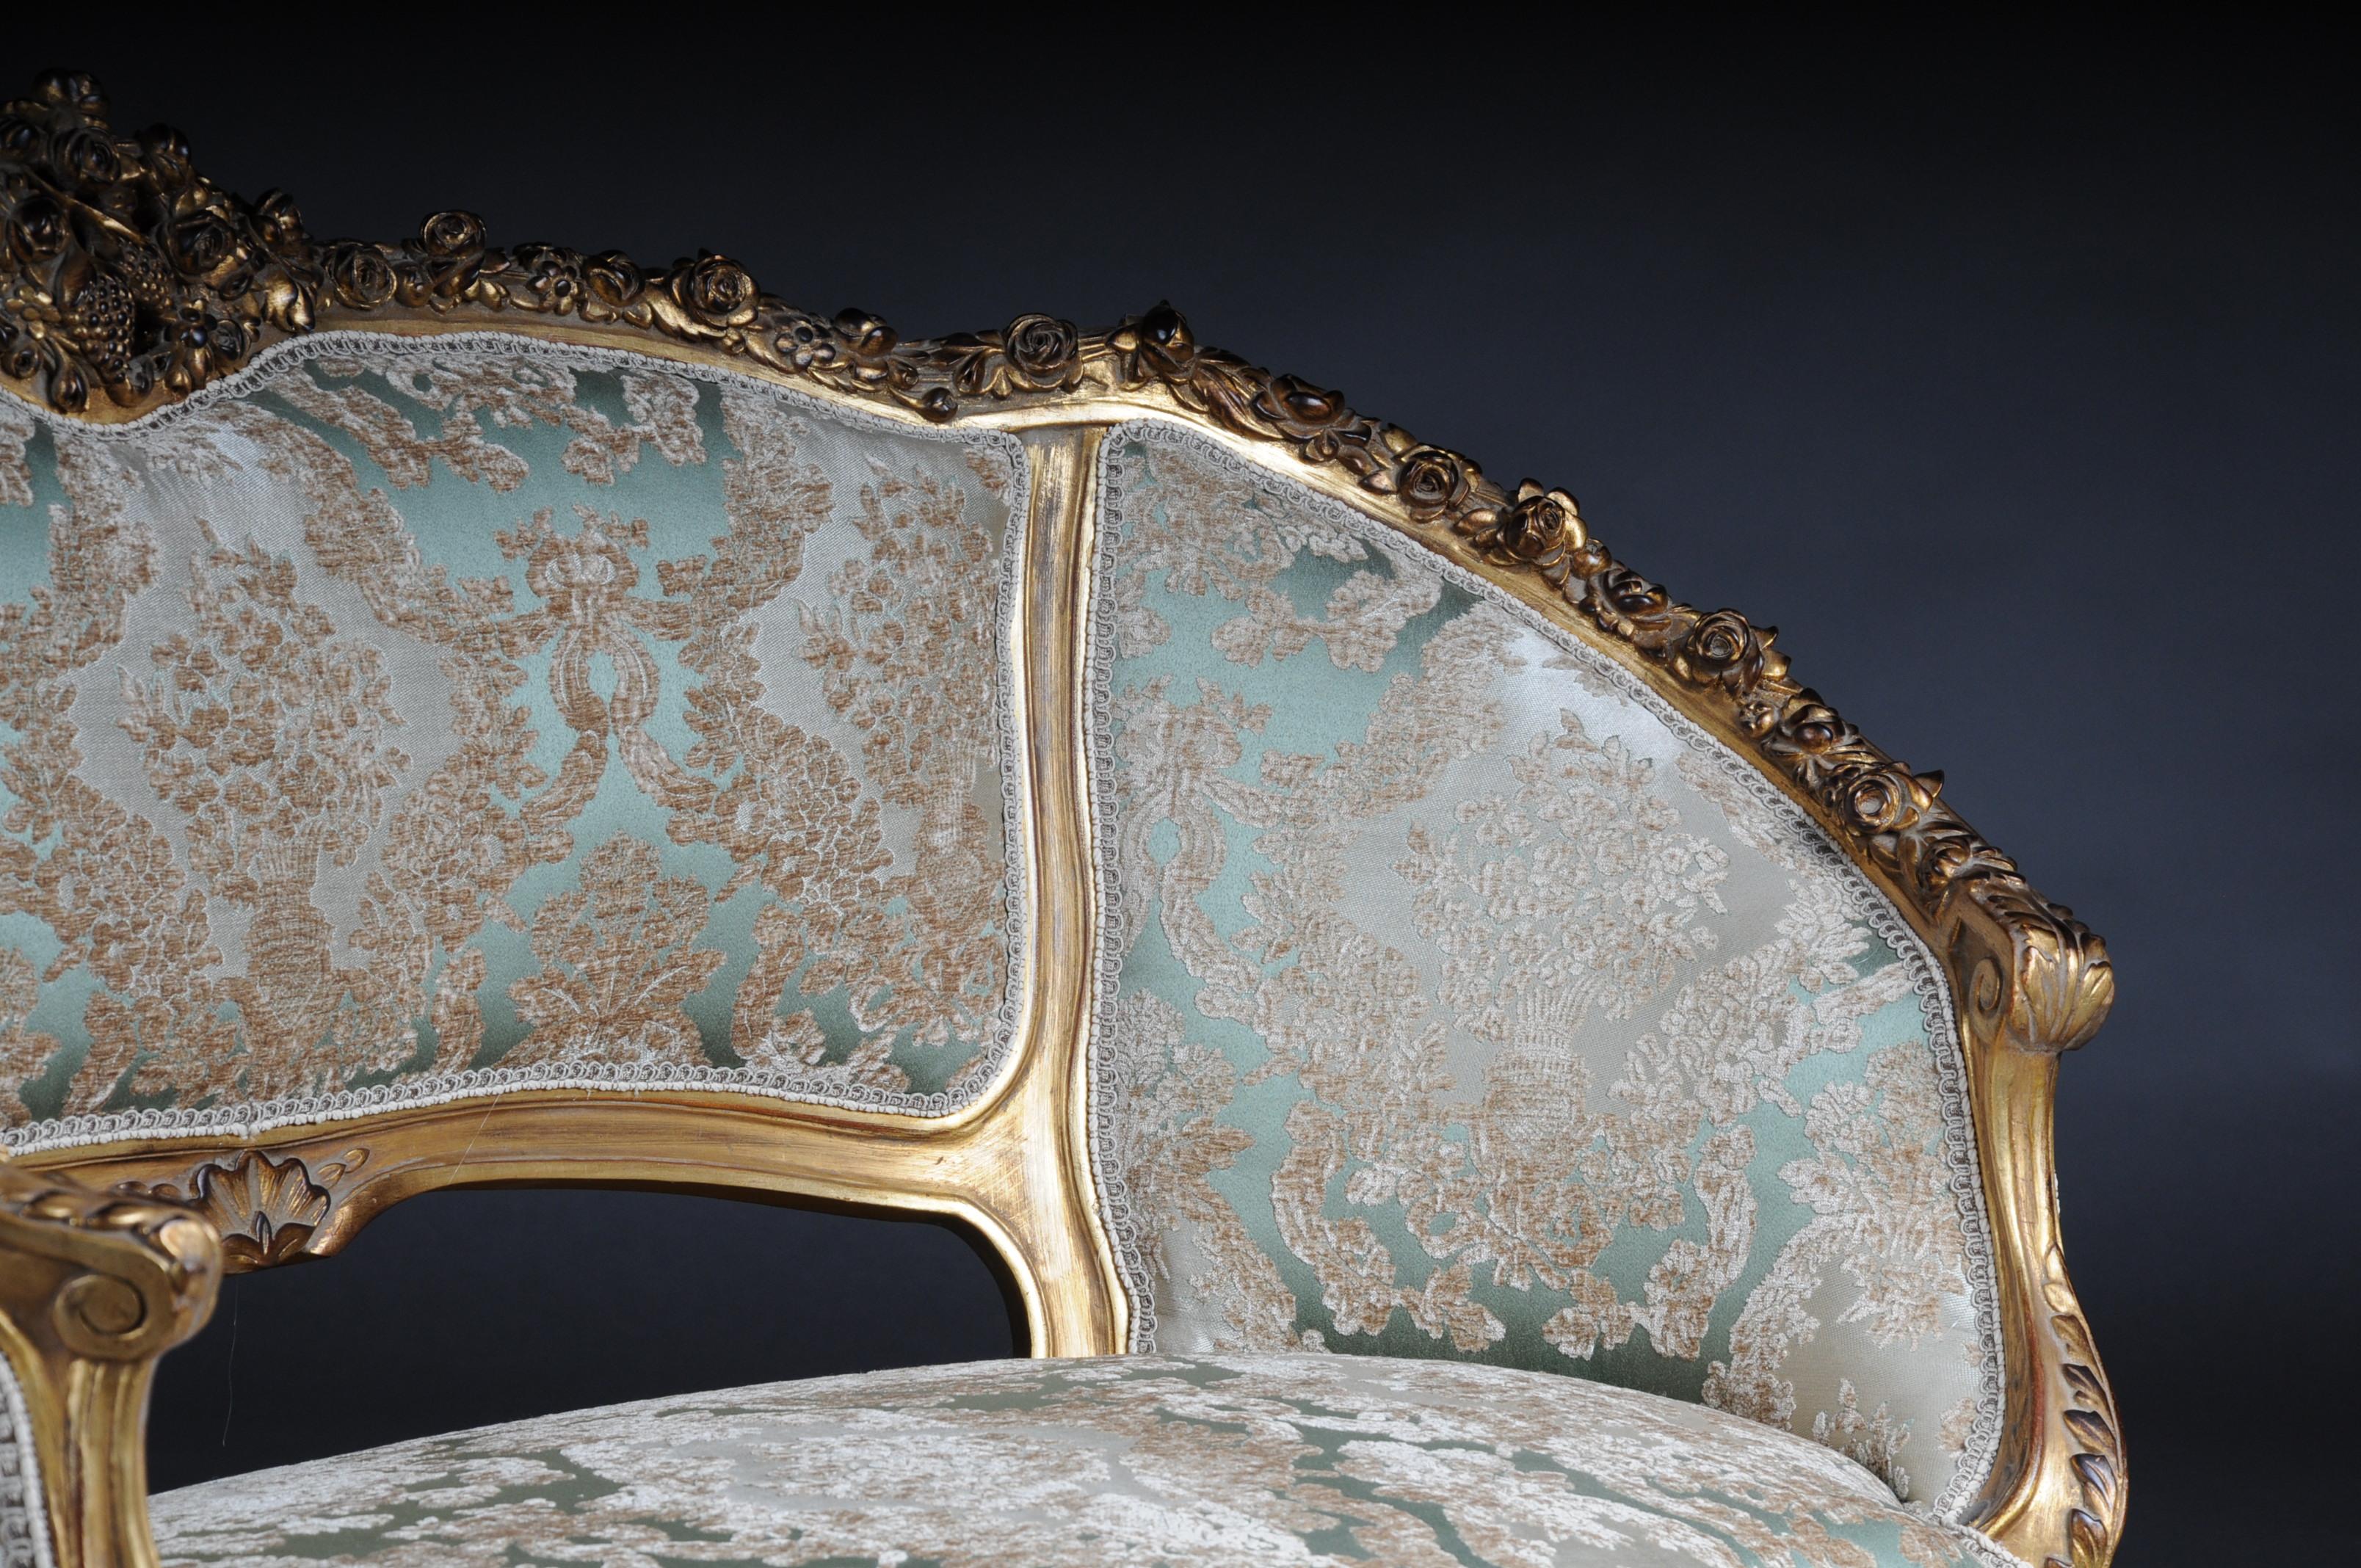 Beech Elegant Sofa, Canapé, Couch in Rococo or Louis XV Style